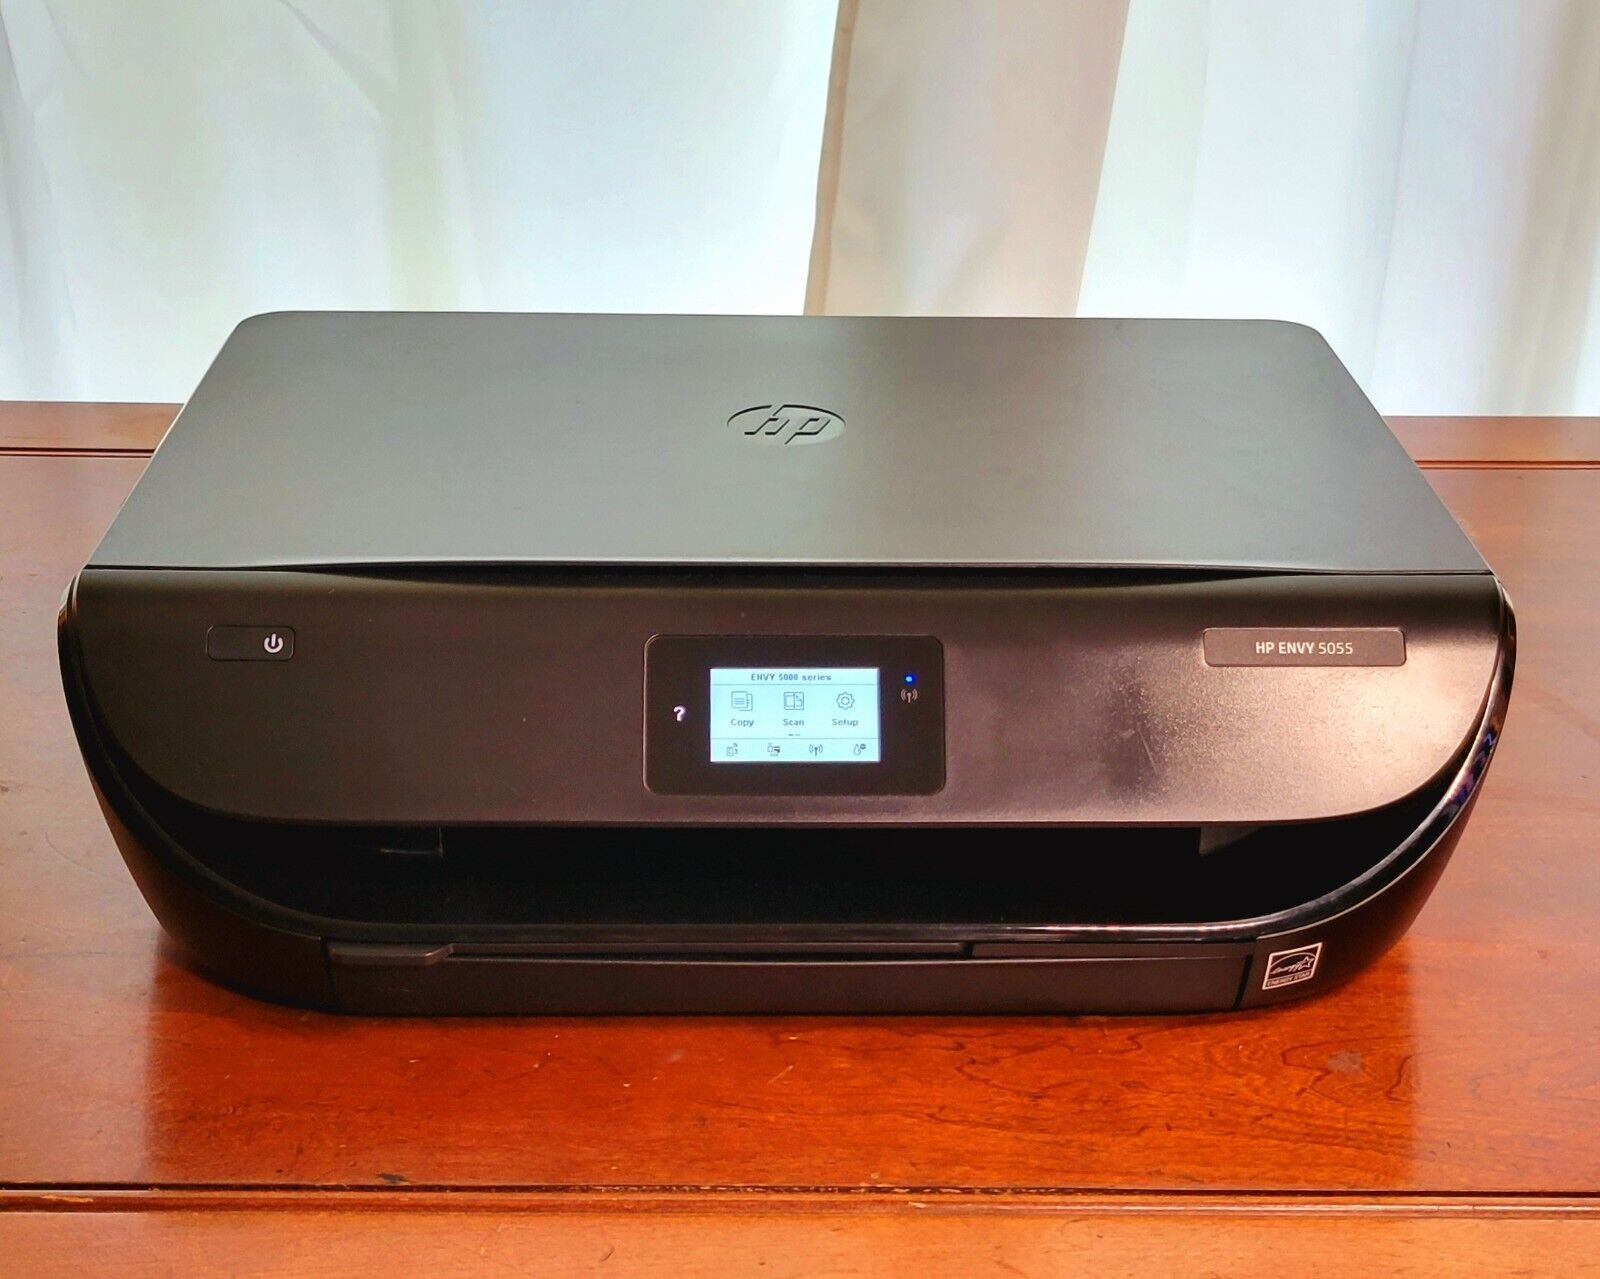 HP Envy 5055 All-in-One Wireless Inkjet Printer - Excellent Condition